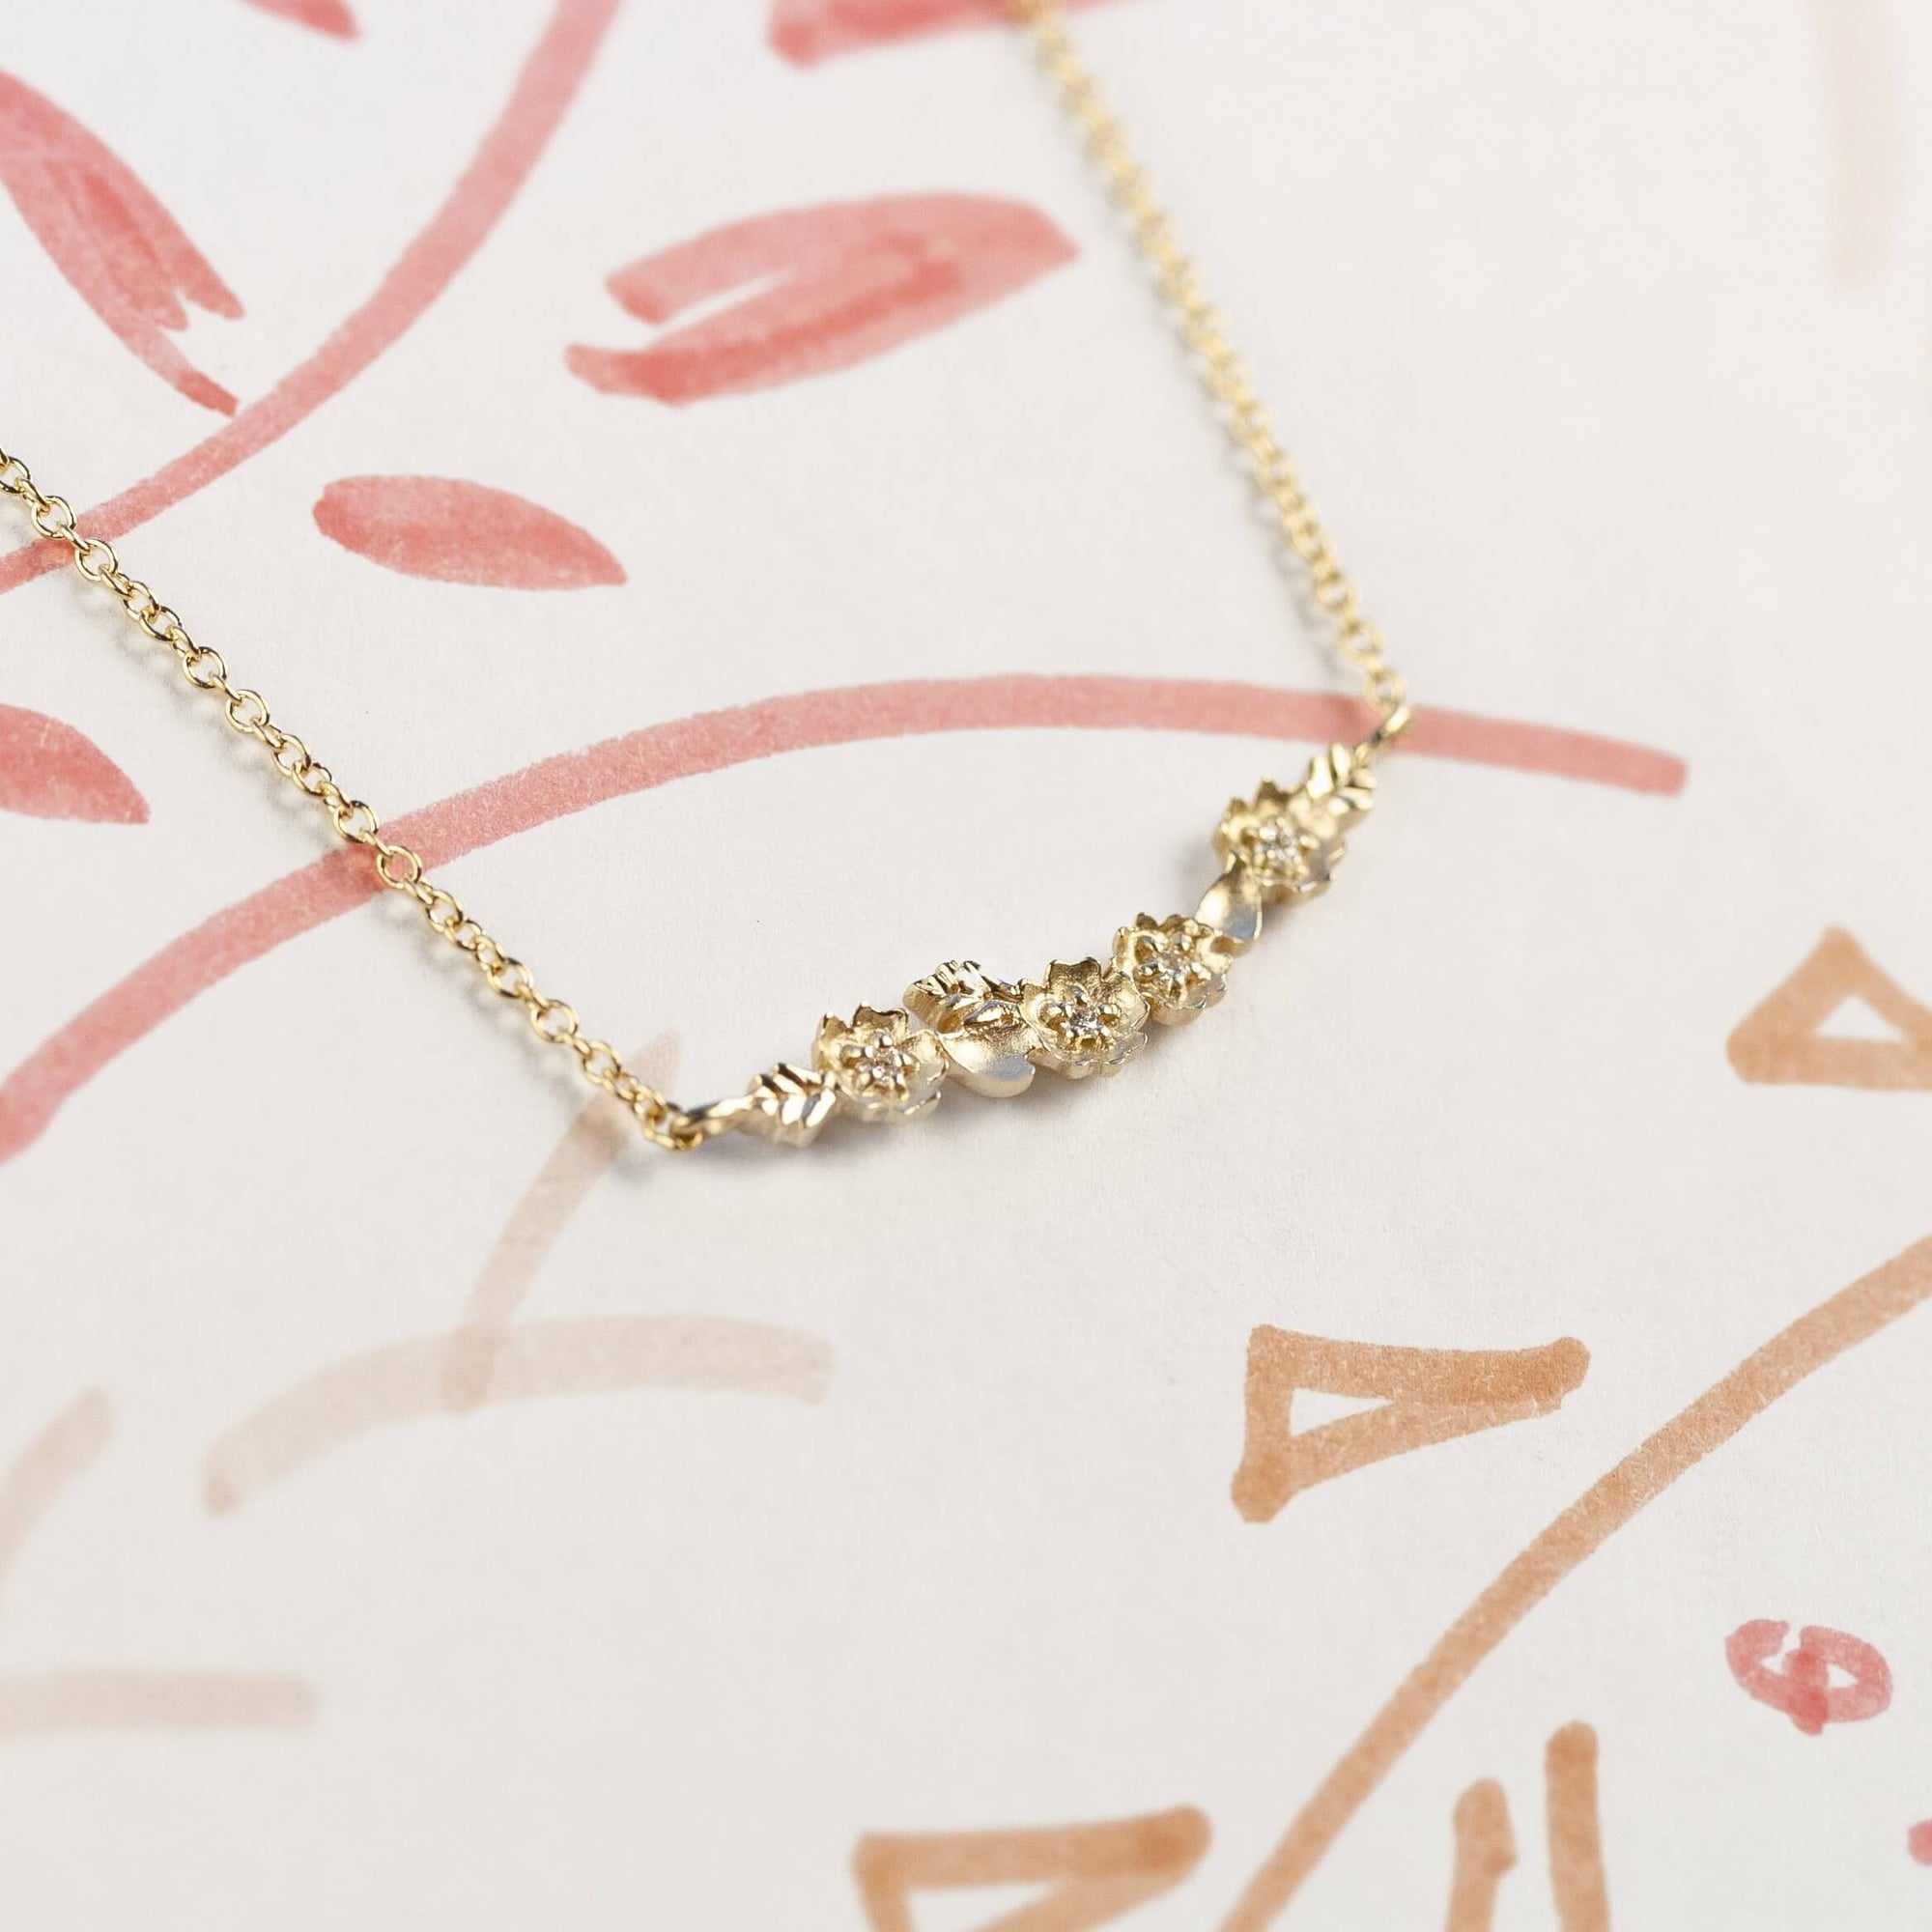 Handmade everyday bar necklace with floral Buttercup stations and botanical leaves in 18K yellow gold by Designer Megan Thorne